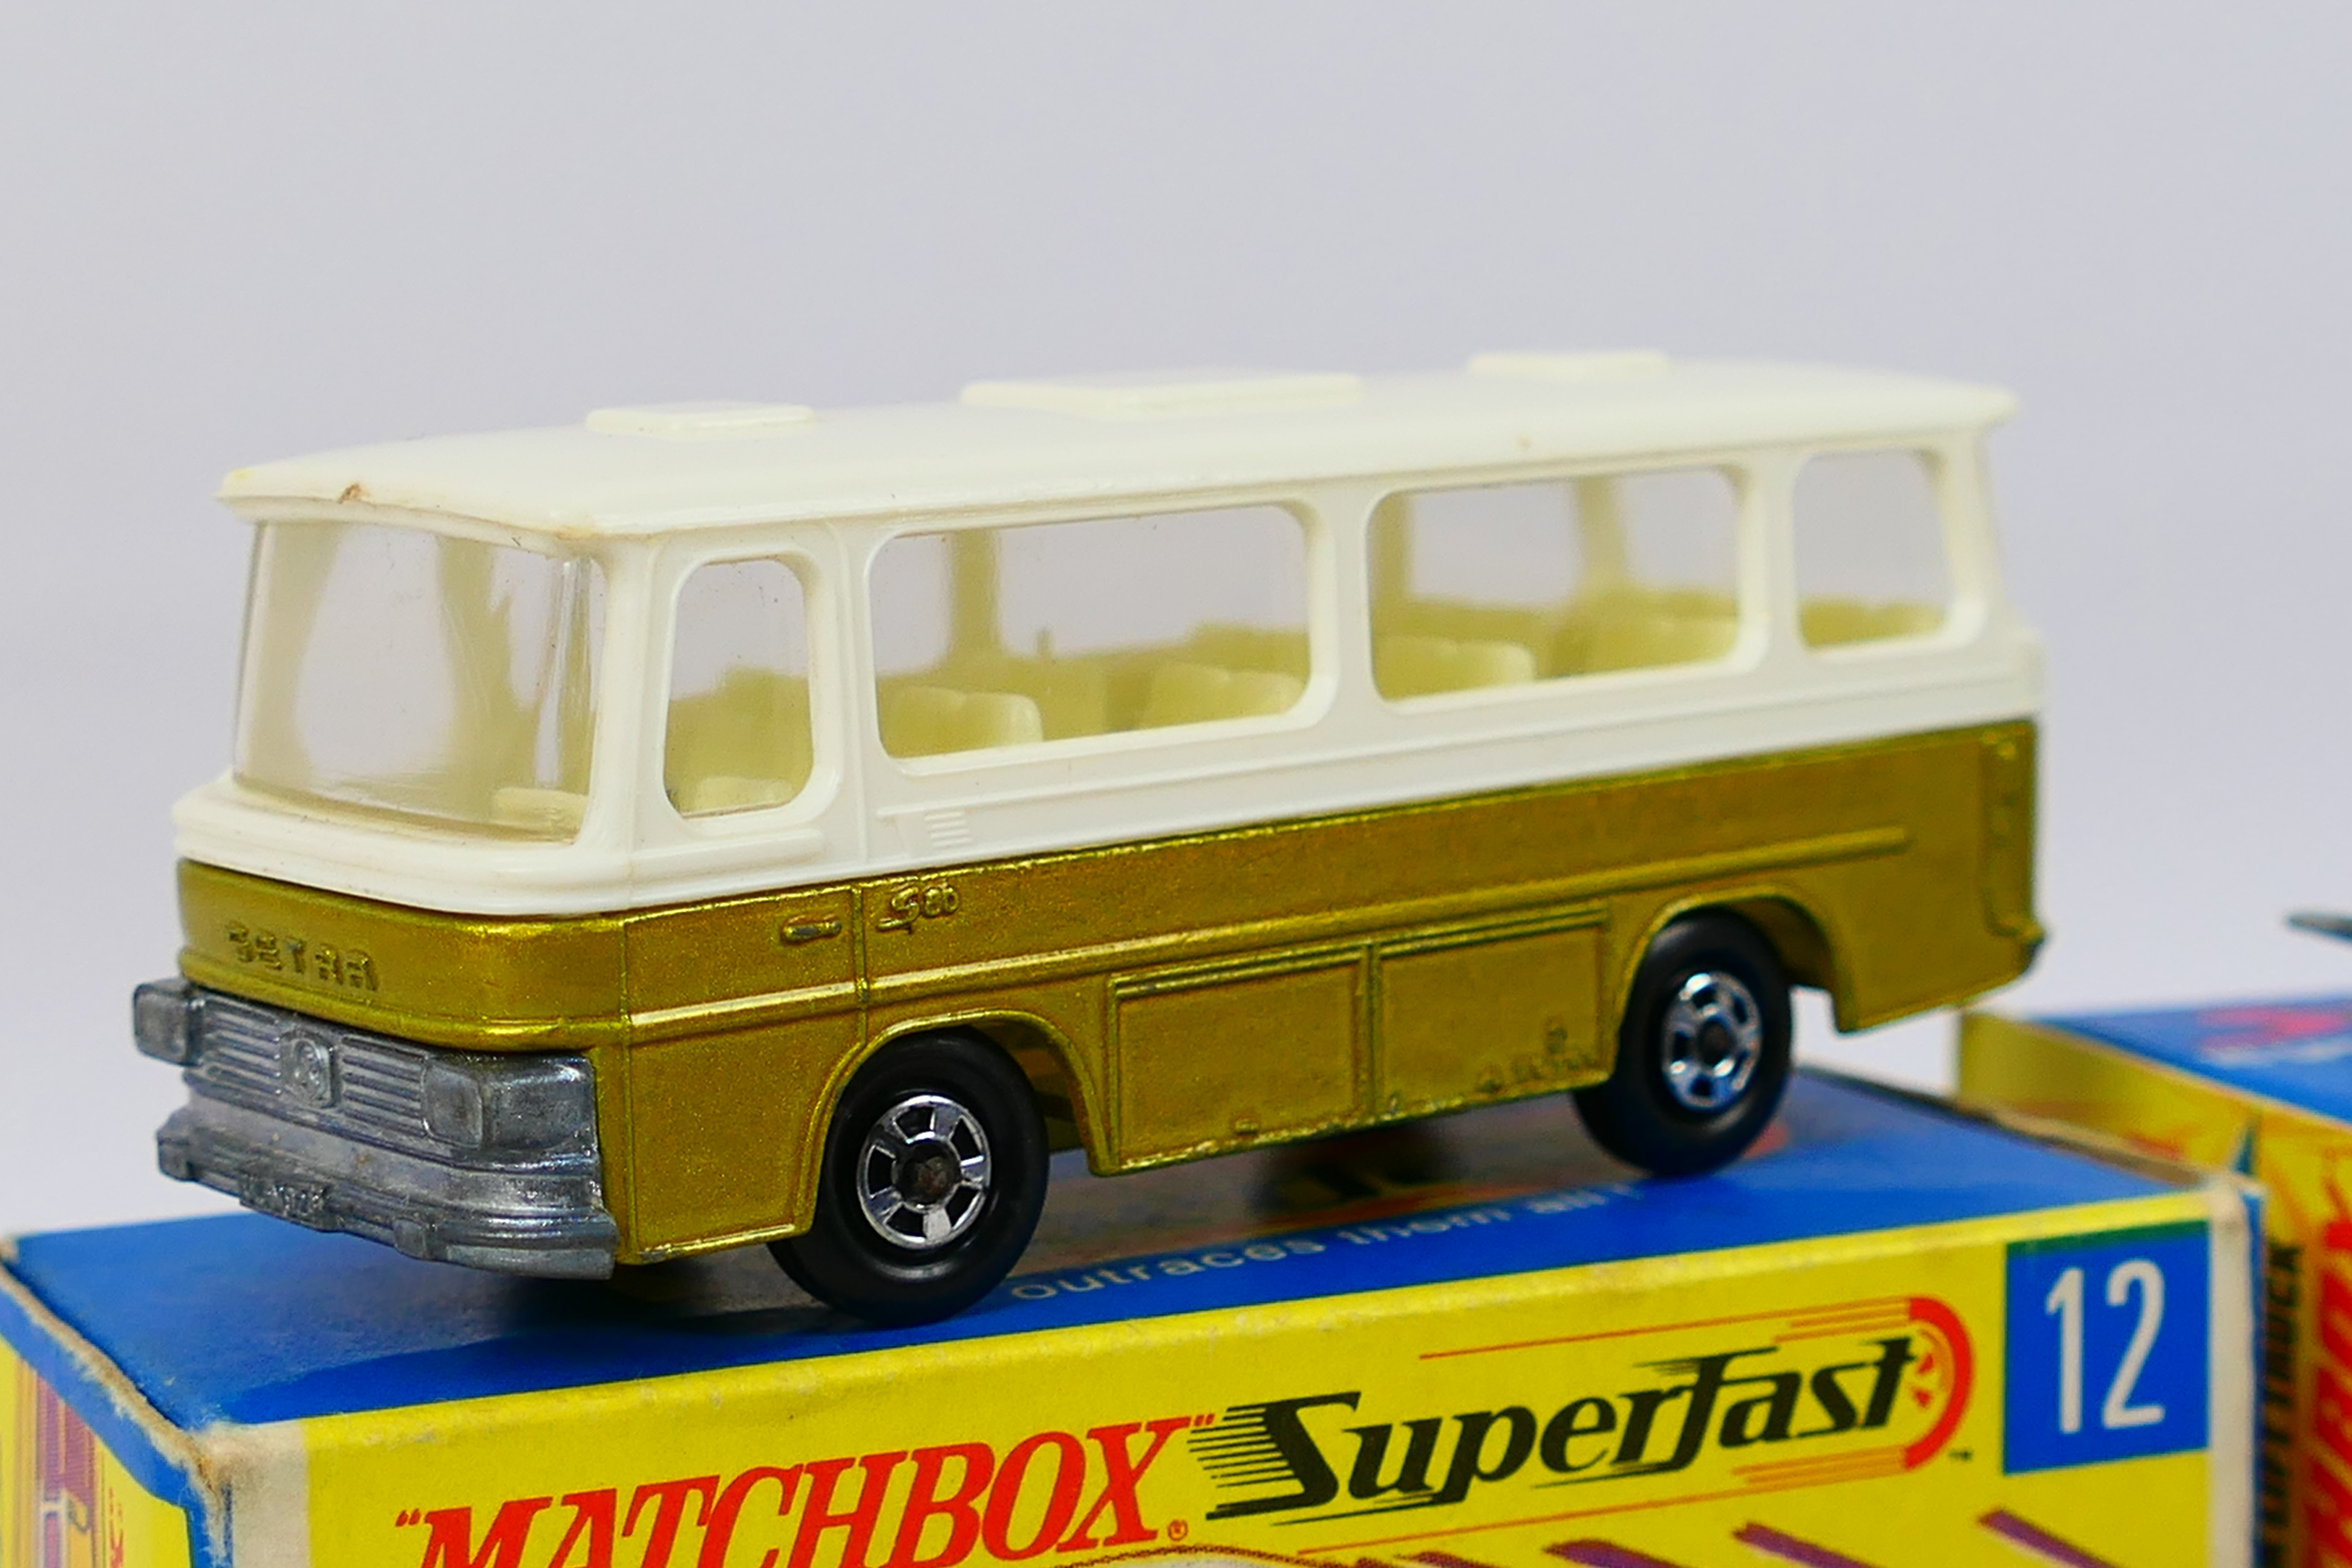 Matchbox - Superfast - 3 x boxed models, Setra Coach # 12, - Image 3 of 6